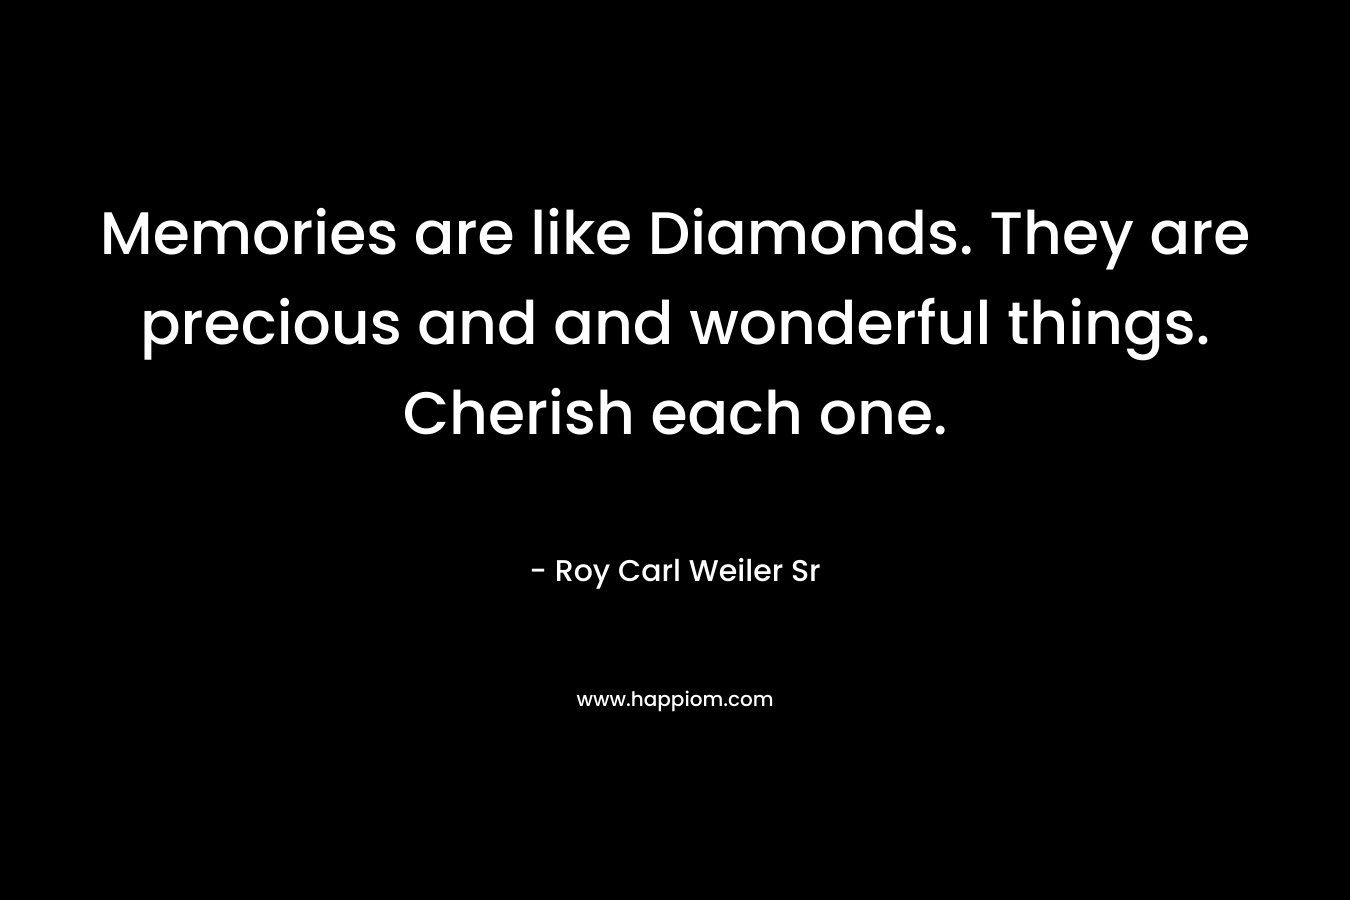 Memories are like Diamonds. They are precious and and wonderful things. Cherish each one. – Roy Carl Weiler Sr